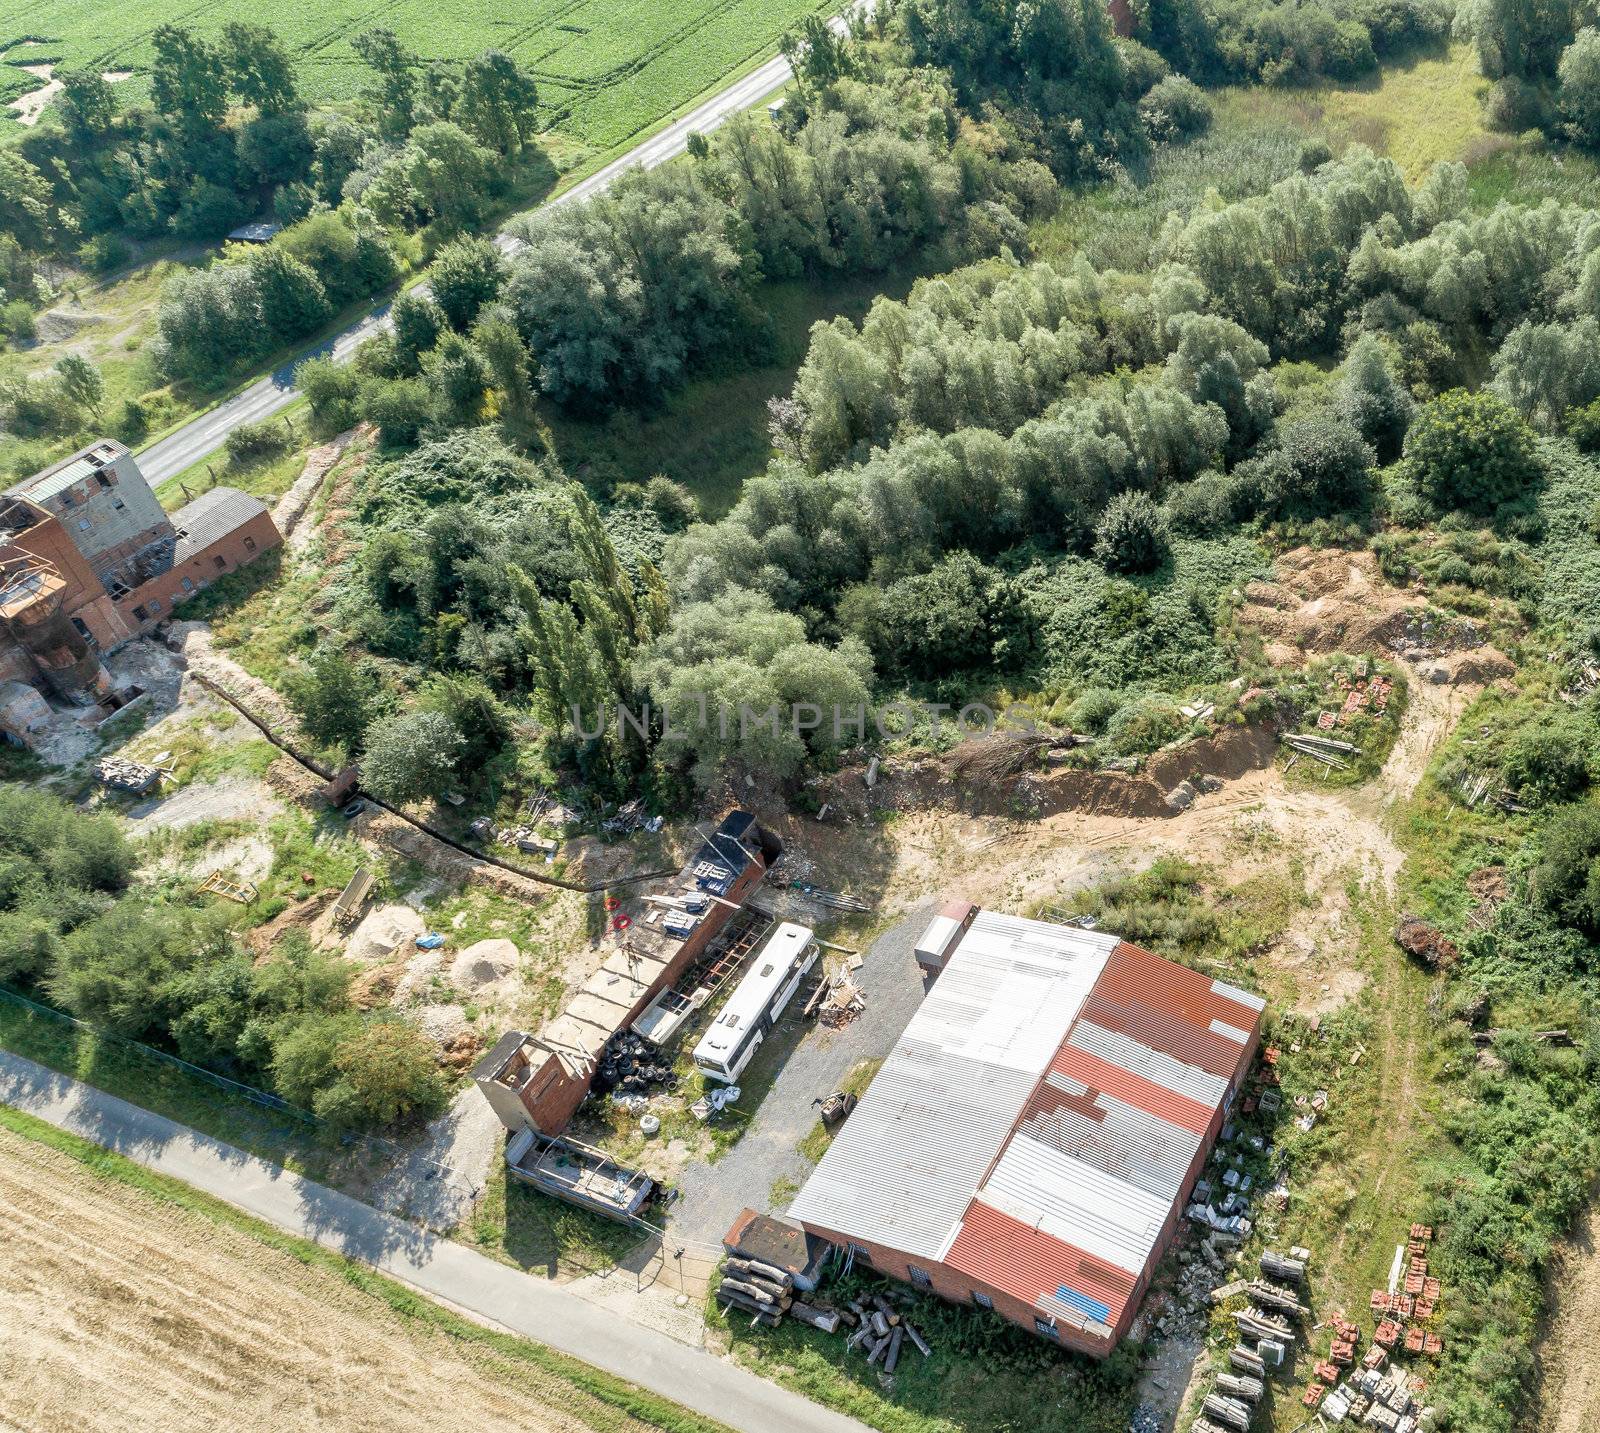 Downsized plant for the repair of machines with a scrap yard behind a forest with a wild dump, diagonally shot aerial photograph, made with drone